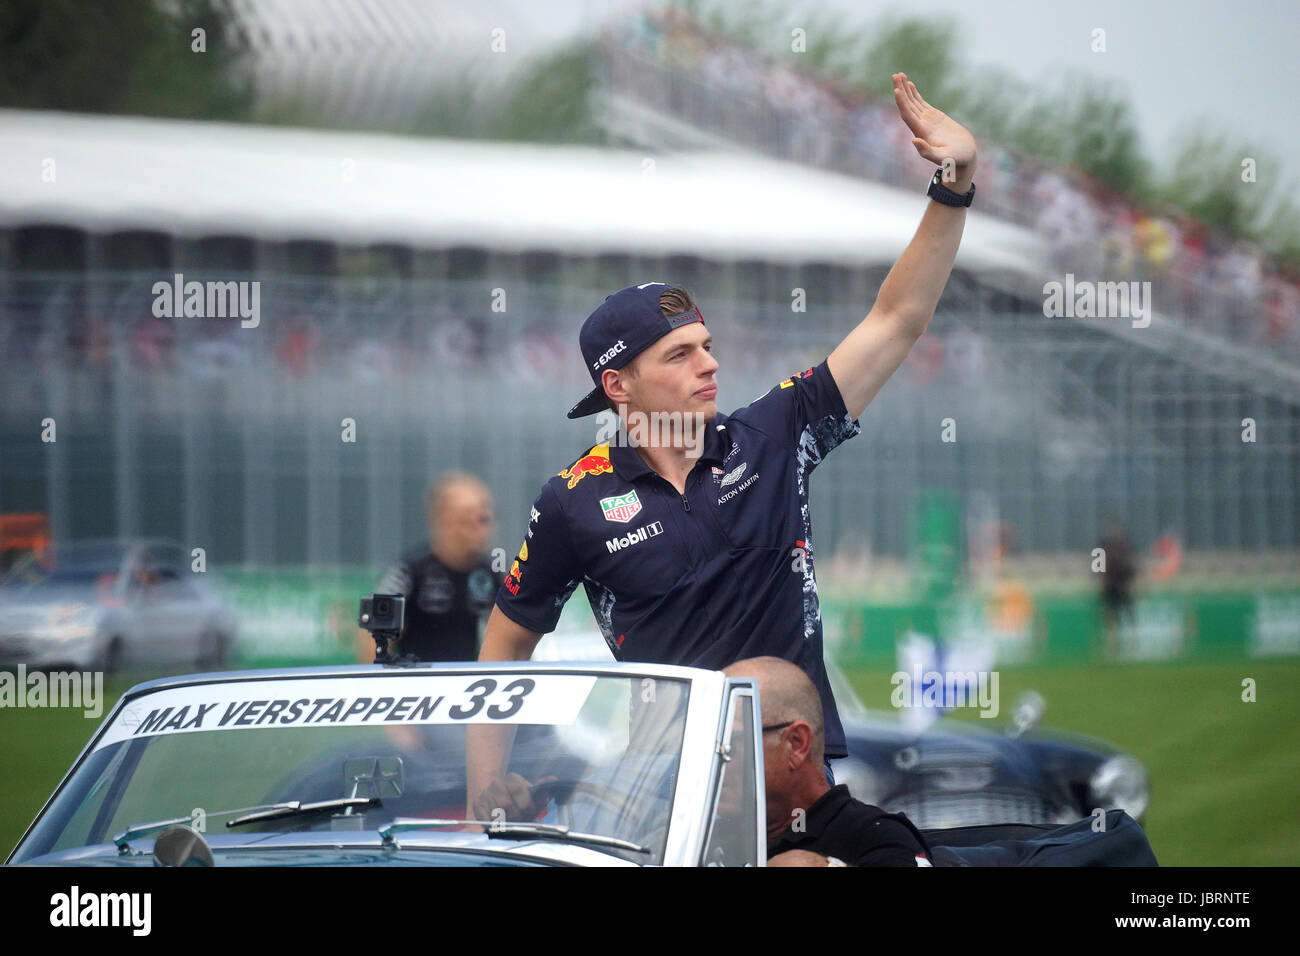 Montreal,Canada,11 June,2017. Formula One driver Max Verstappen in the drivers parade at the 2017 Montreal Grand Prix .Credit: Mario Beauregard/Alamy Live News Stock Photo